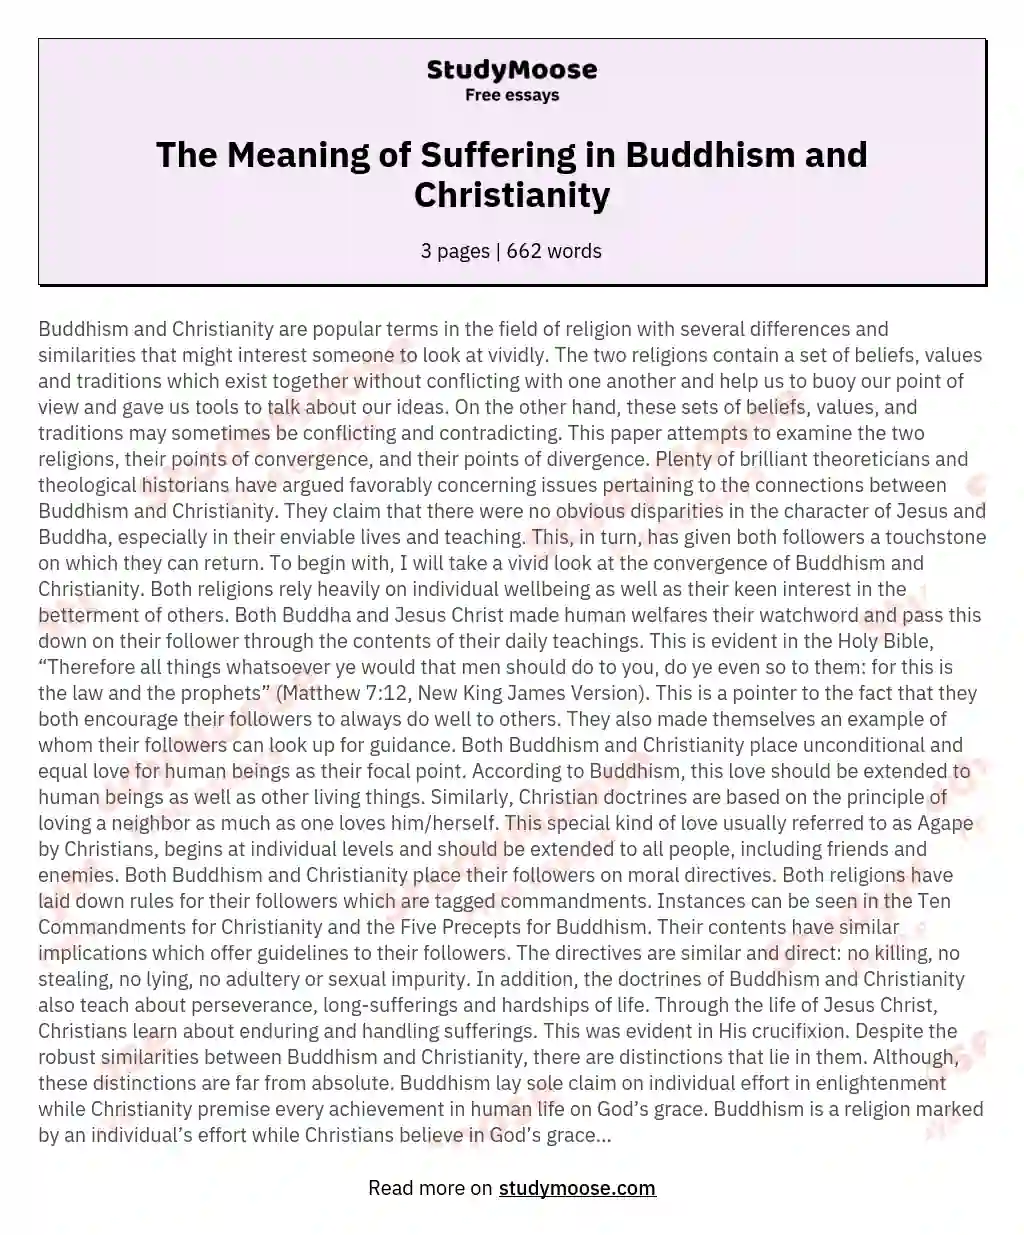 The Meaning of Suffering in Buddhism and Christianity essay